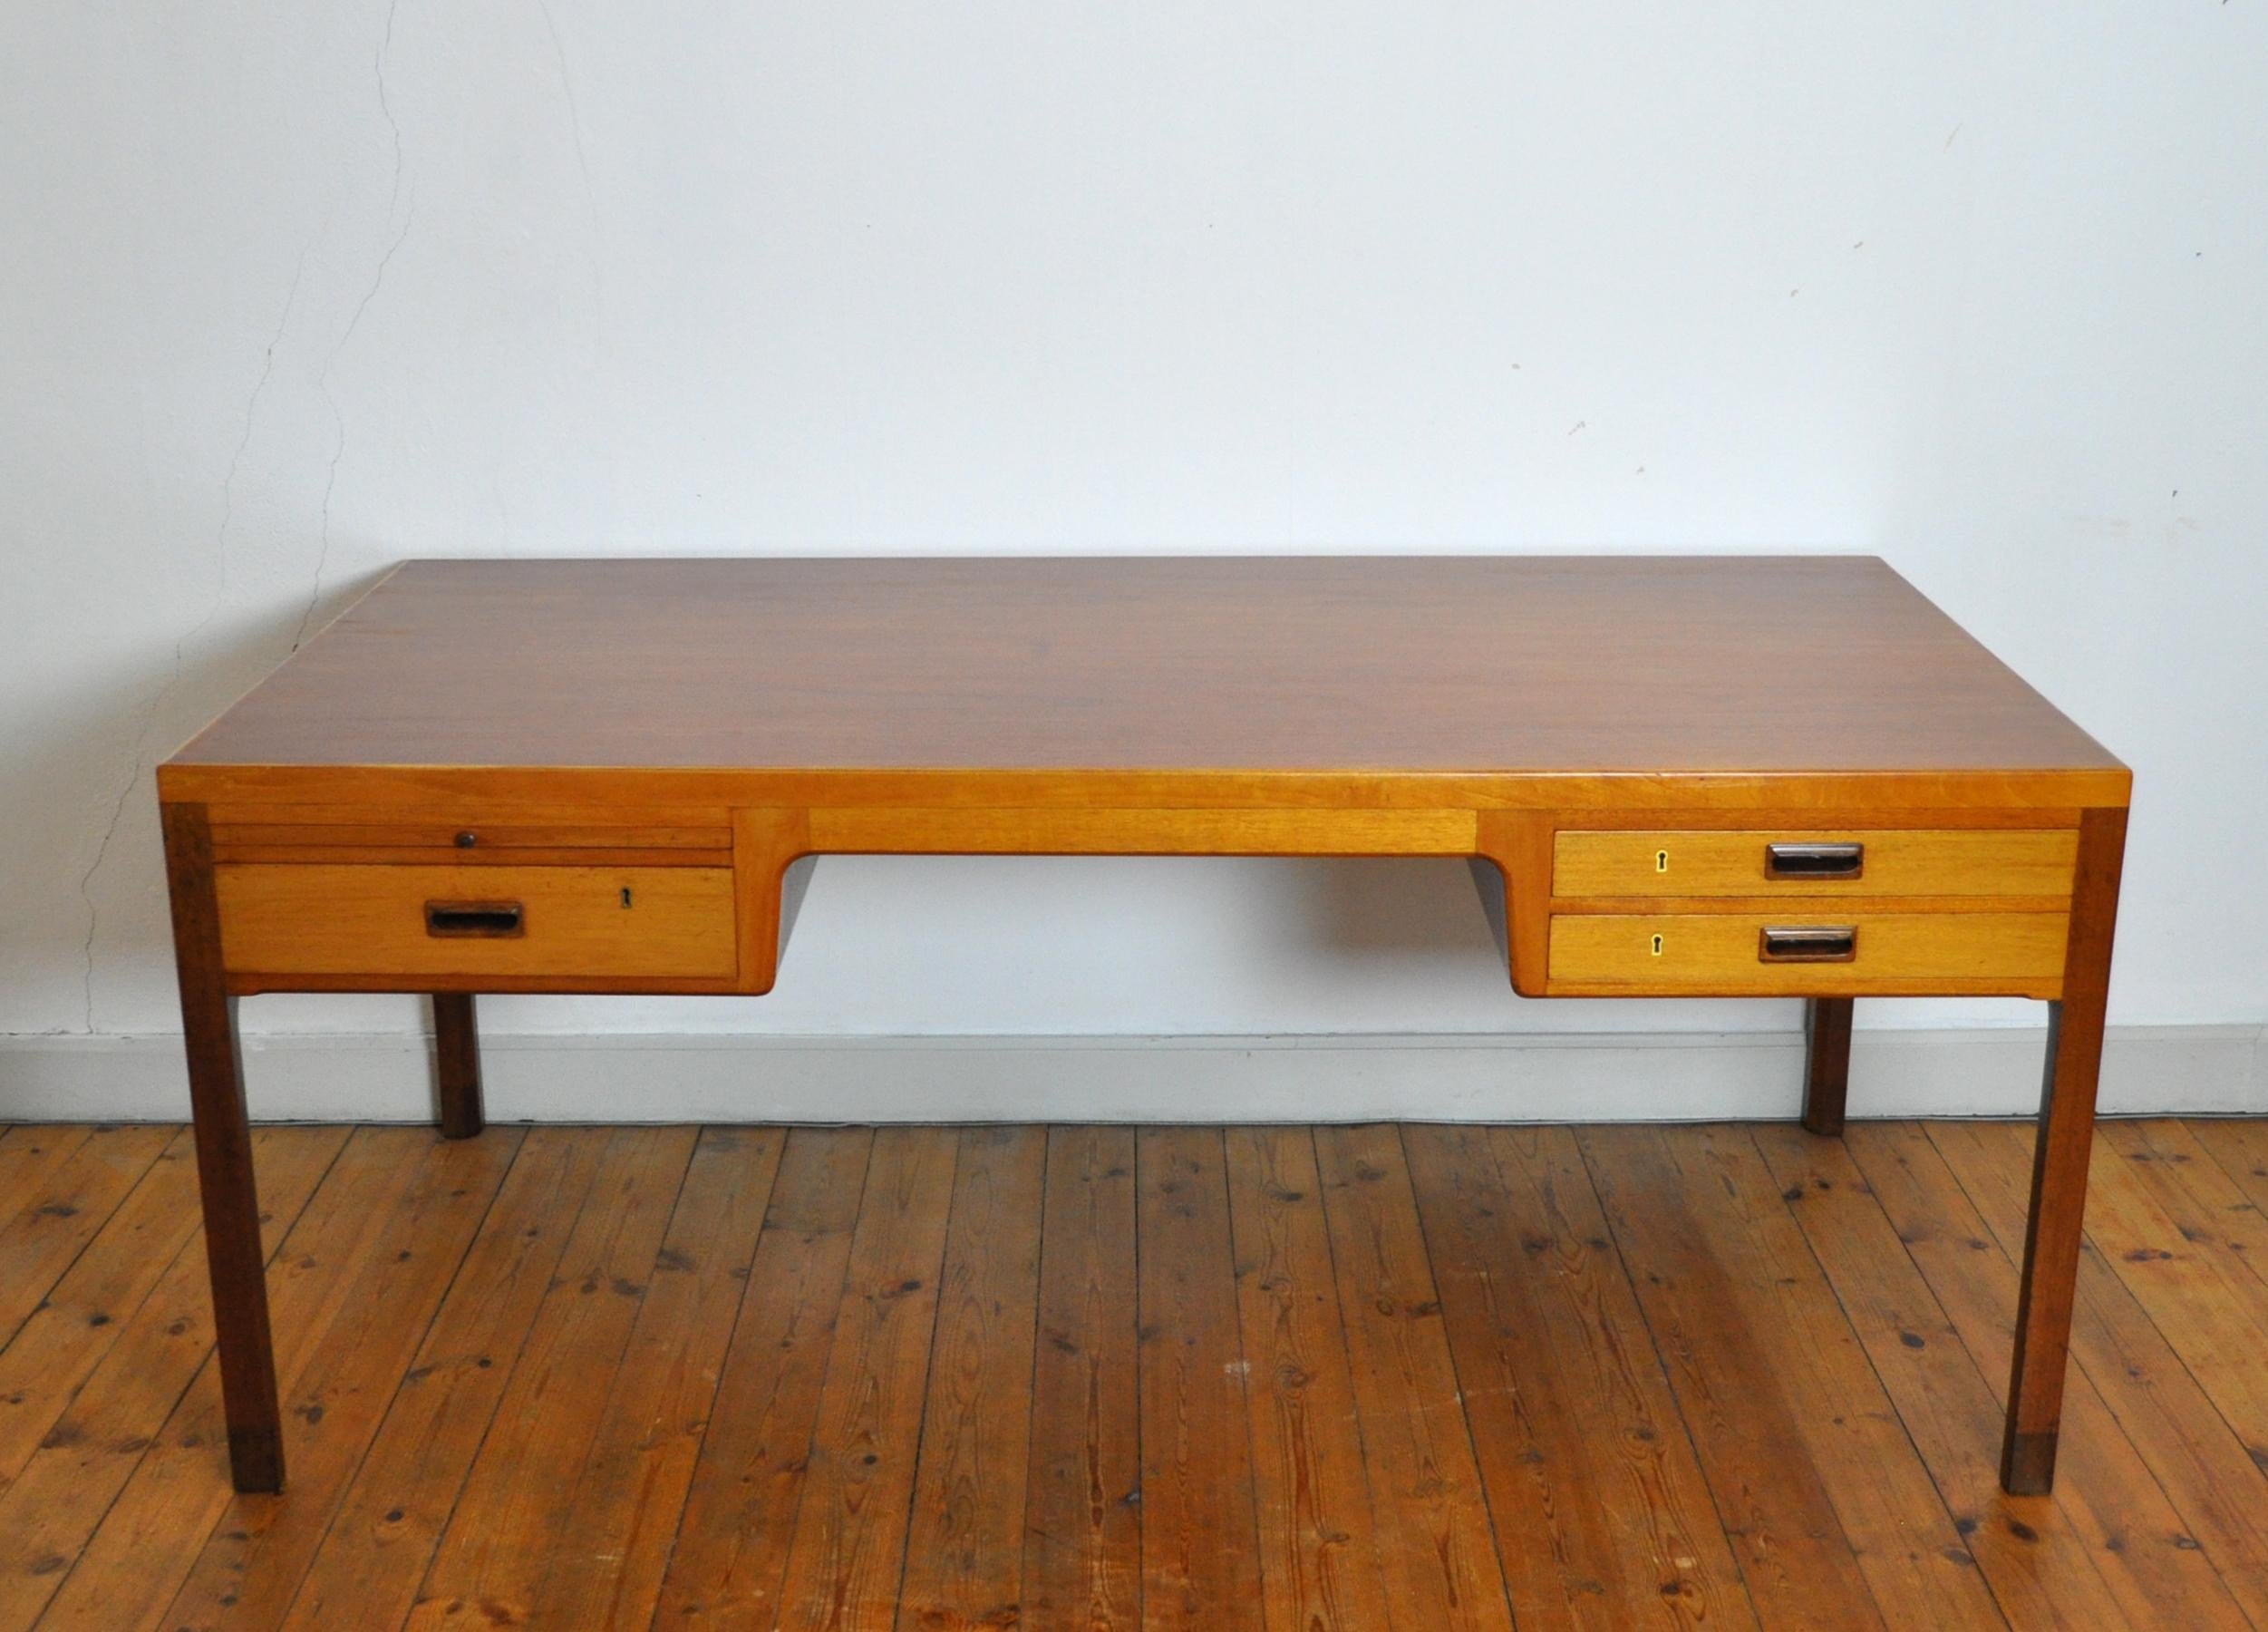 Scandinavian Modern mahogany desk designed by Ejnar Larsen and Aksel Bender Madsen, made by the Danish cabinetmaker Willy Beck in the 1950s. Features three drawers and a pull-out work surface, expressive tipped squared legs and drawer pulls. 66-68